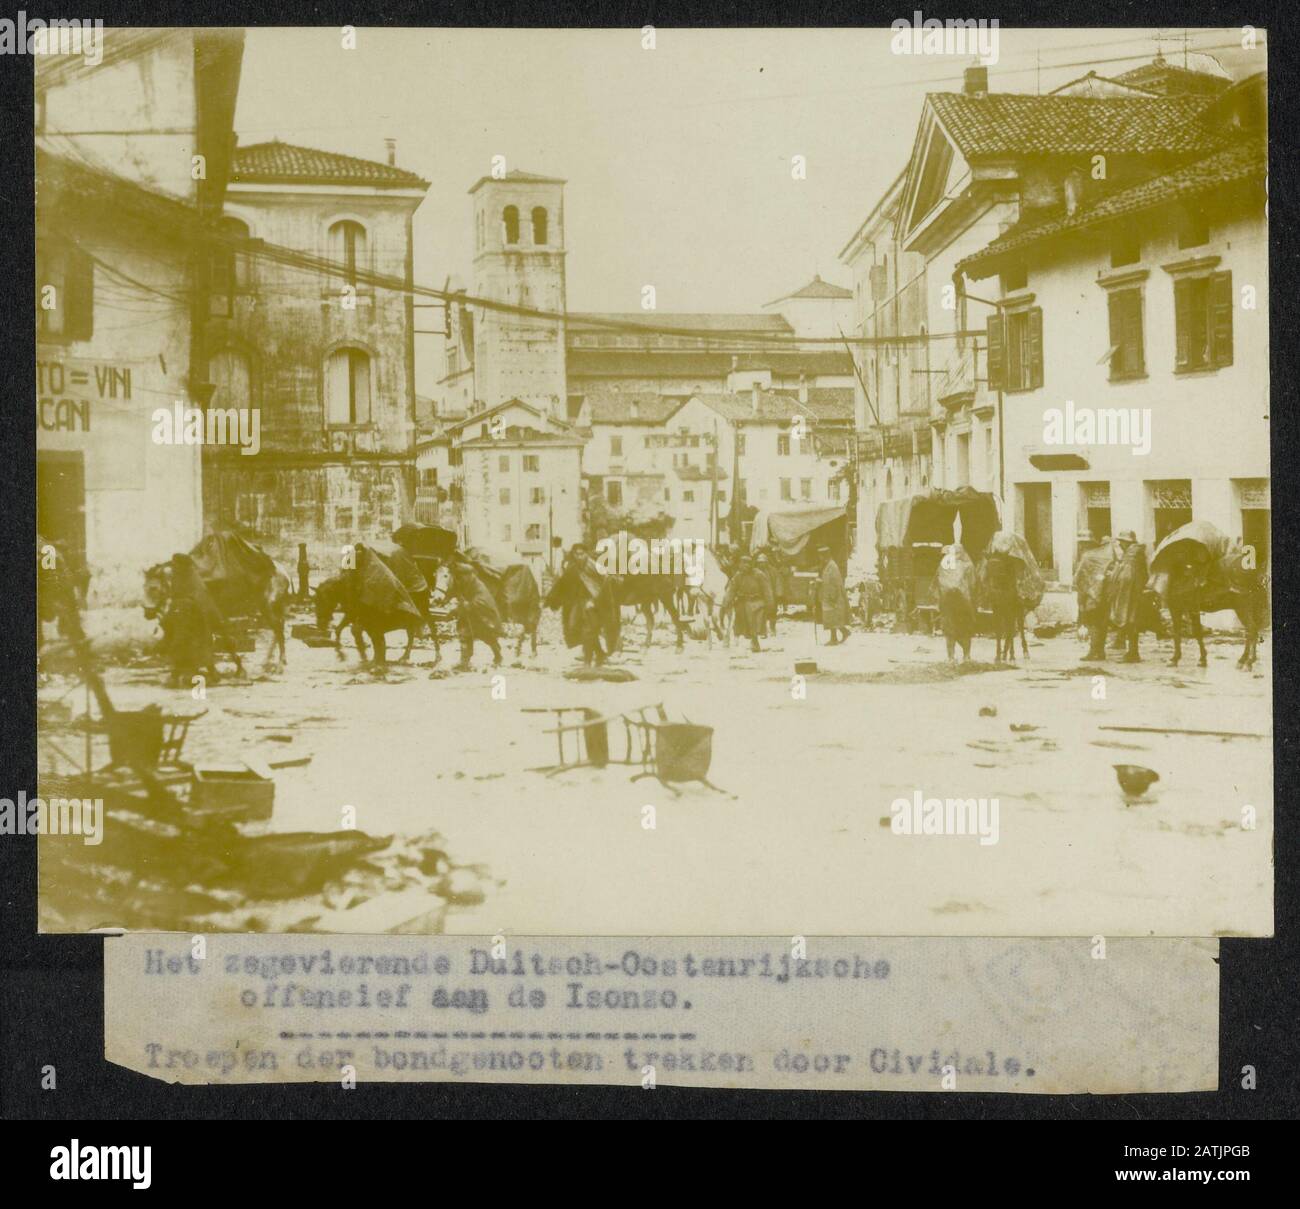 The victorious Duitsch Austrian offensive on the Isonzo Description: Troops pull the allies Cividale. Date: {1914-1918} Location: Cividale, Italy Keywords: WWI, fronts, soldiers, offensives, city Stock Photo